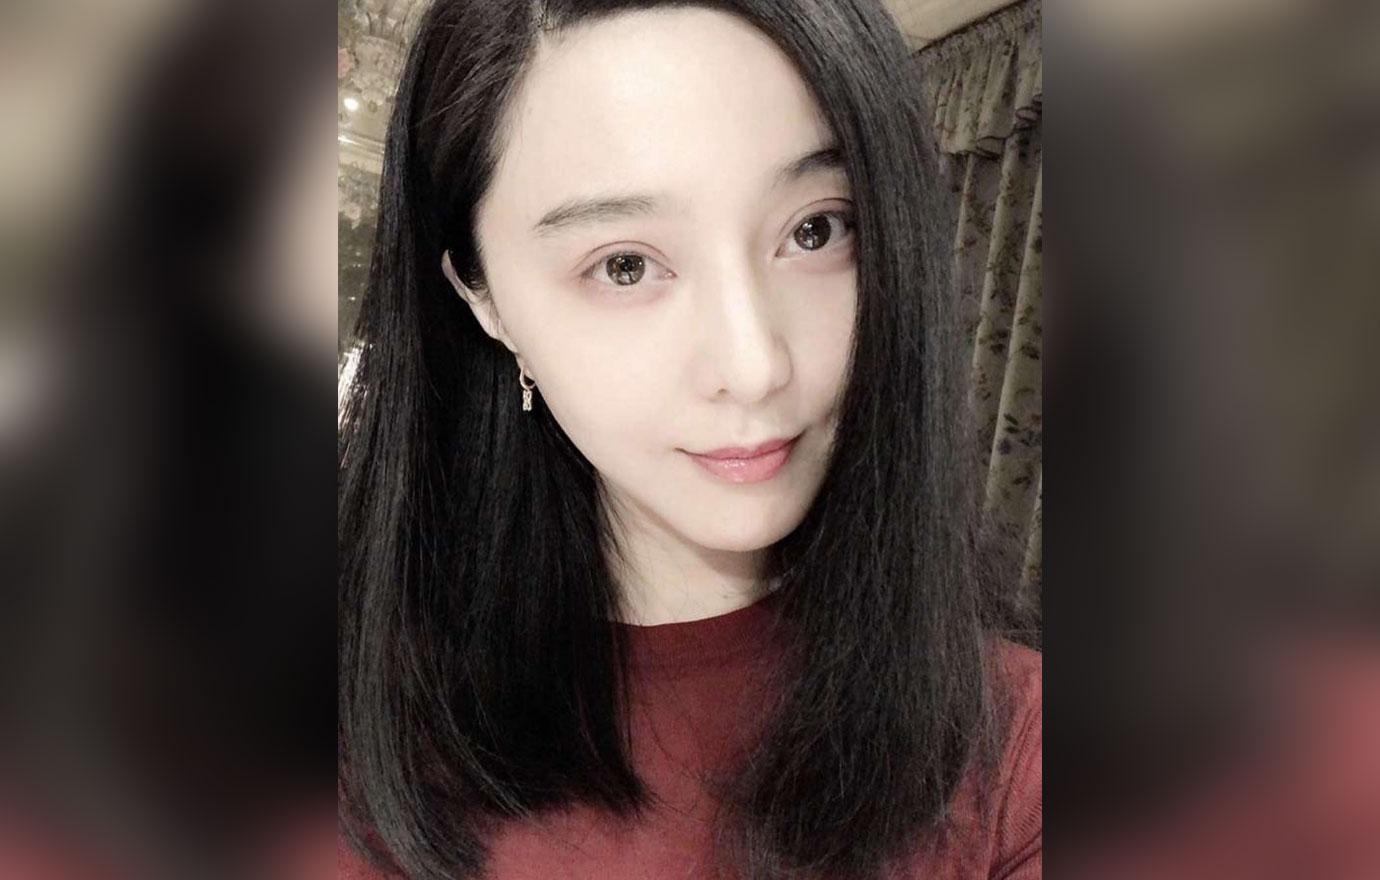 Mesterskab Kanon Logisk Fan Bingbing Post First Photos Of Her Movie Star Face After Secret Chinese  Jail Stint